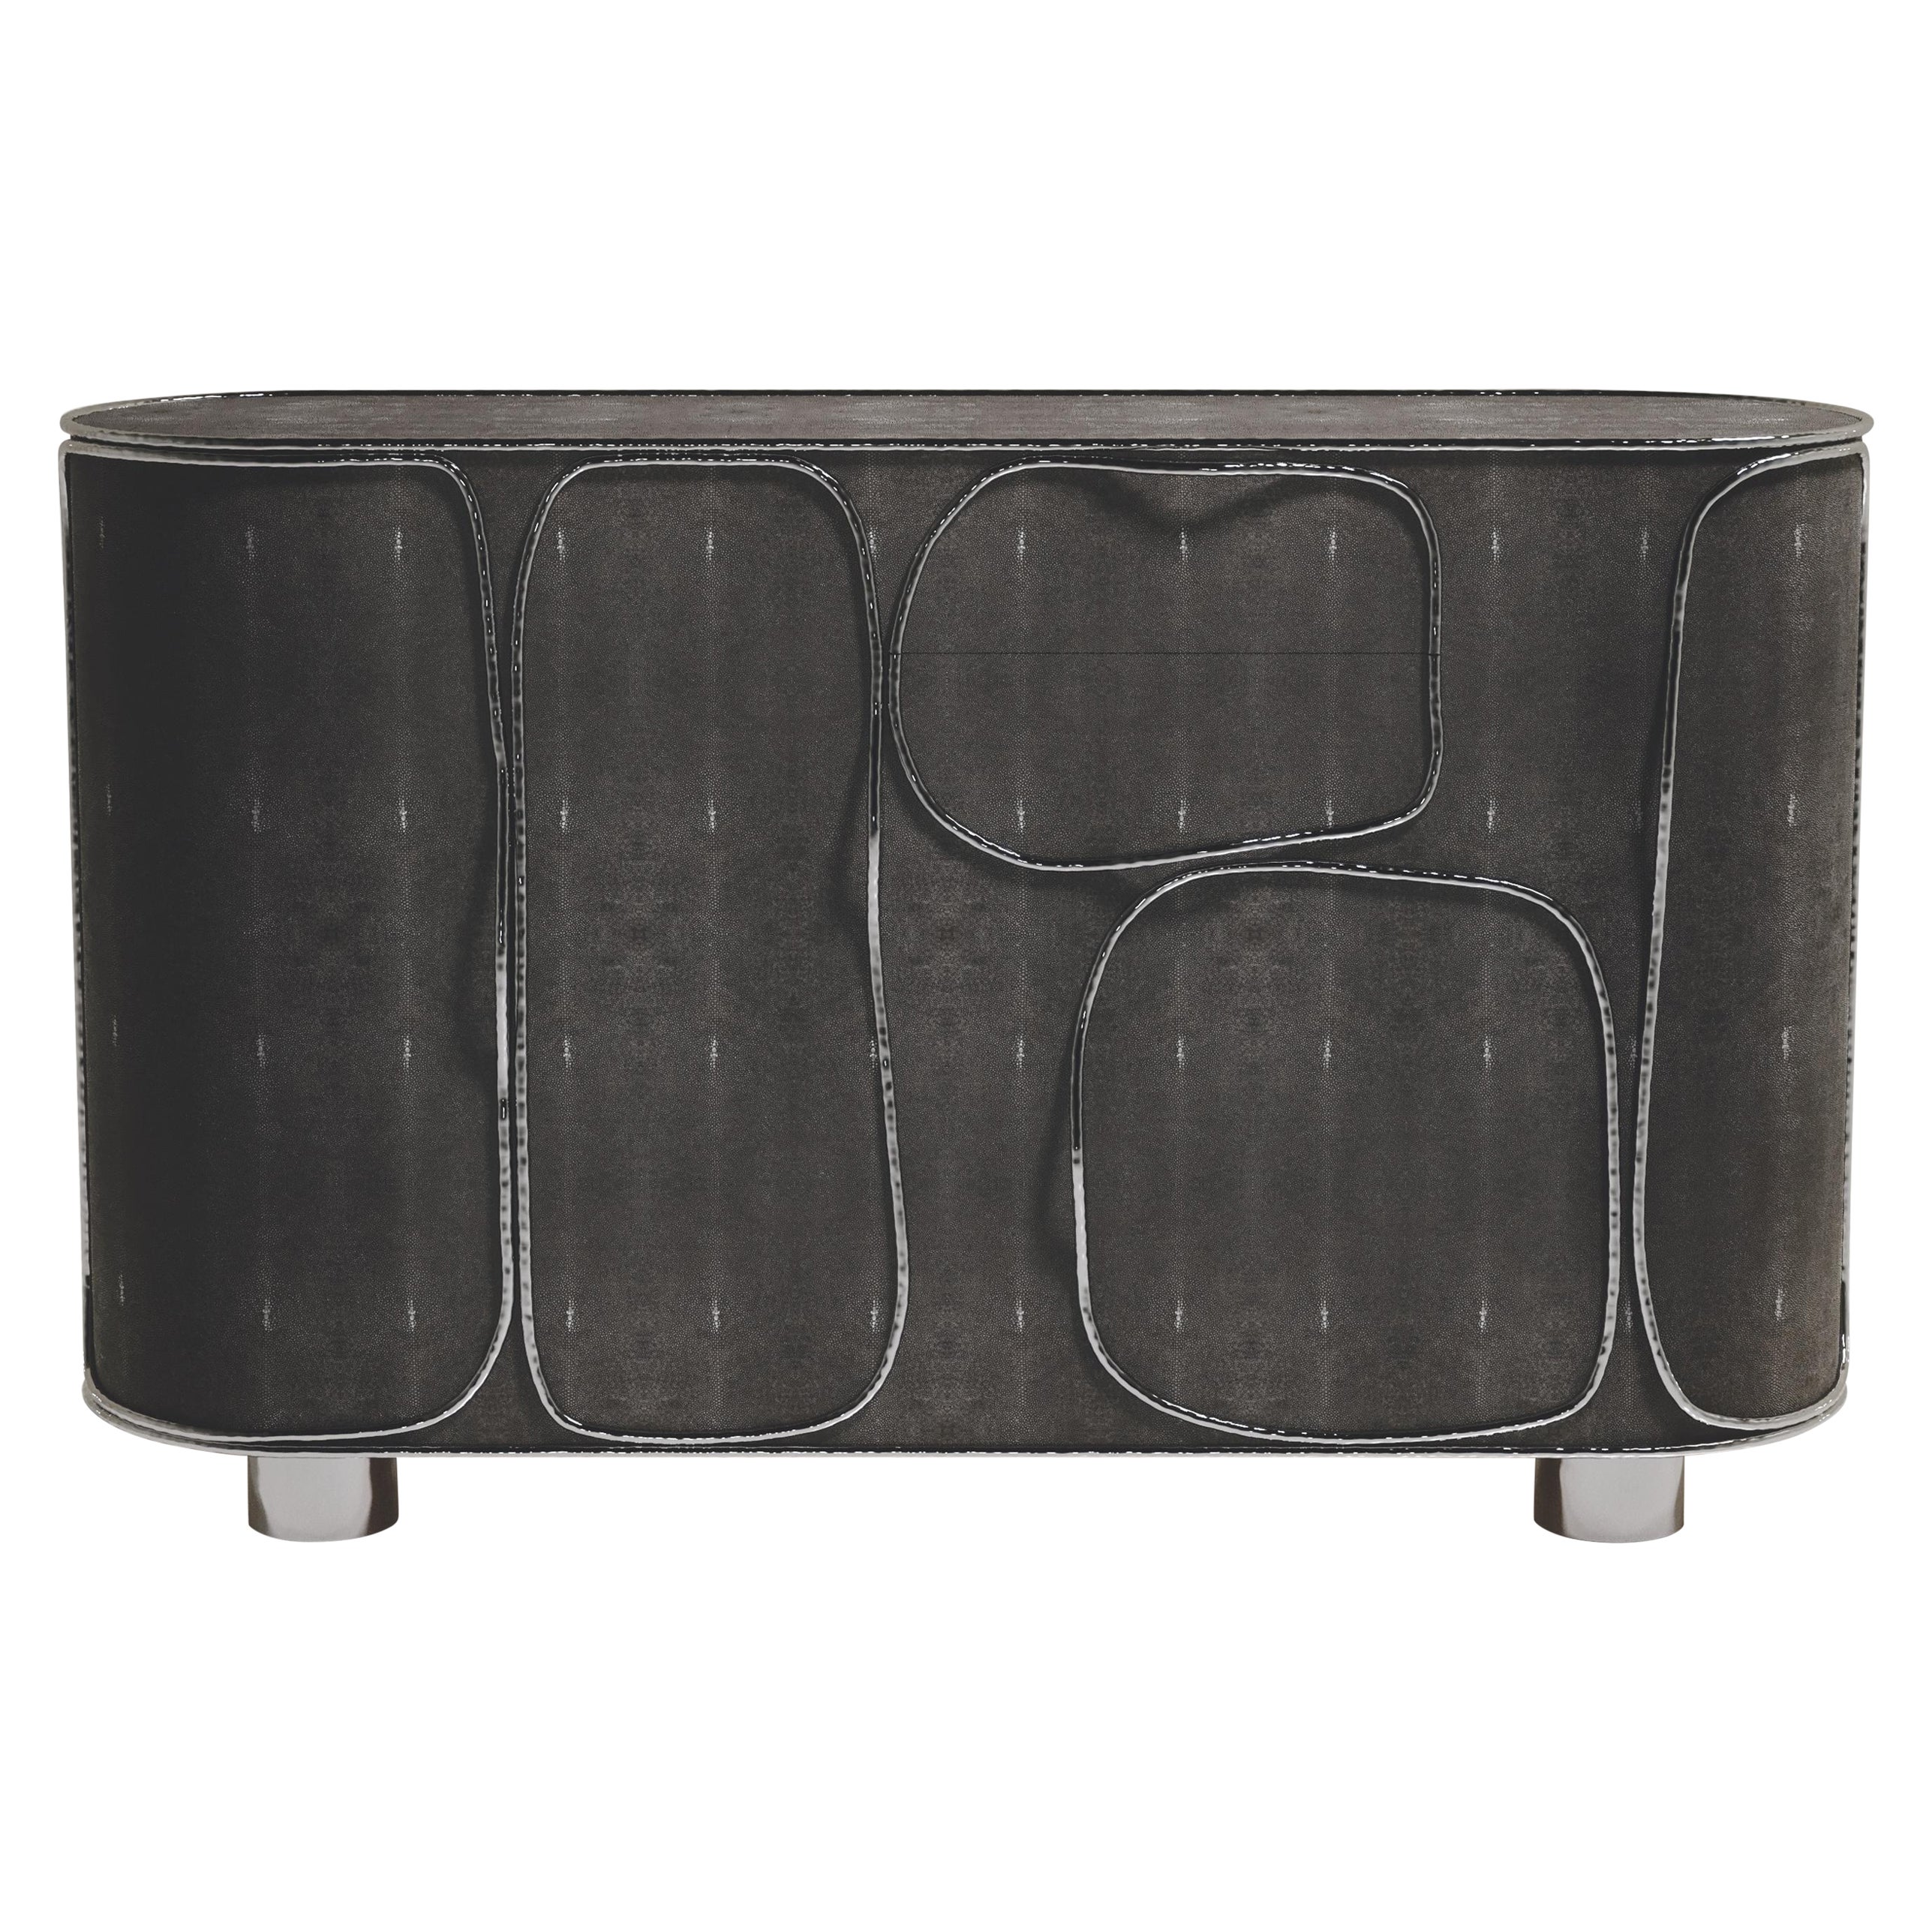 Shagreen Buffet with Chrome Finish Stainless Steel Details by R&Y Augousti